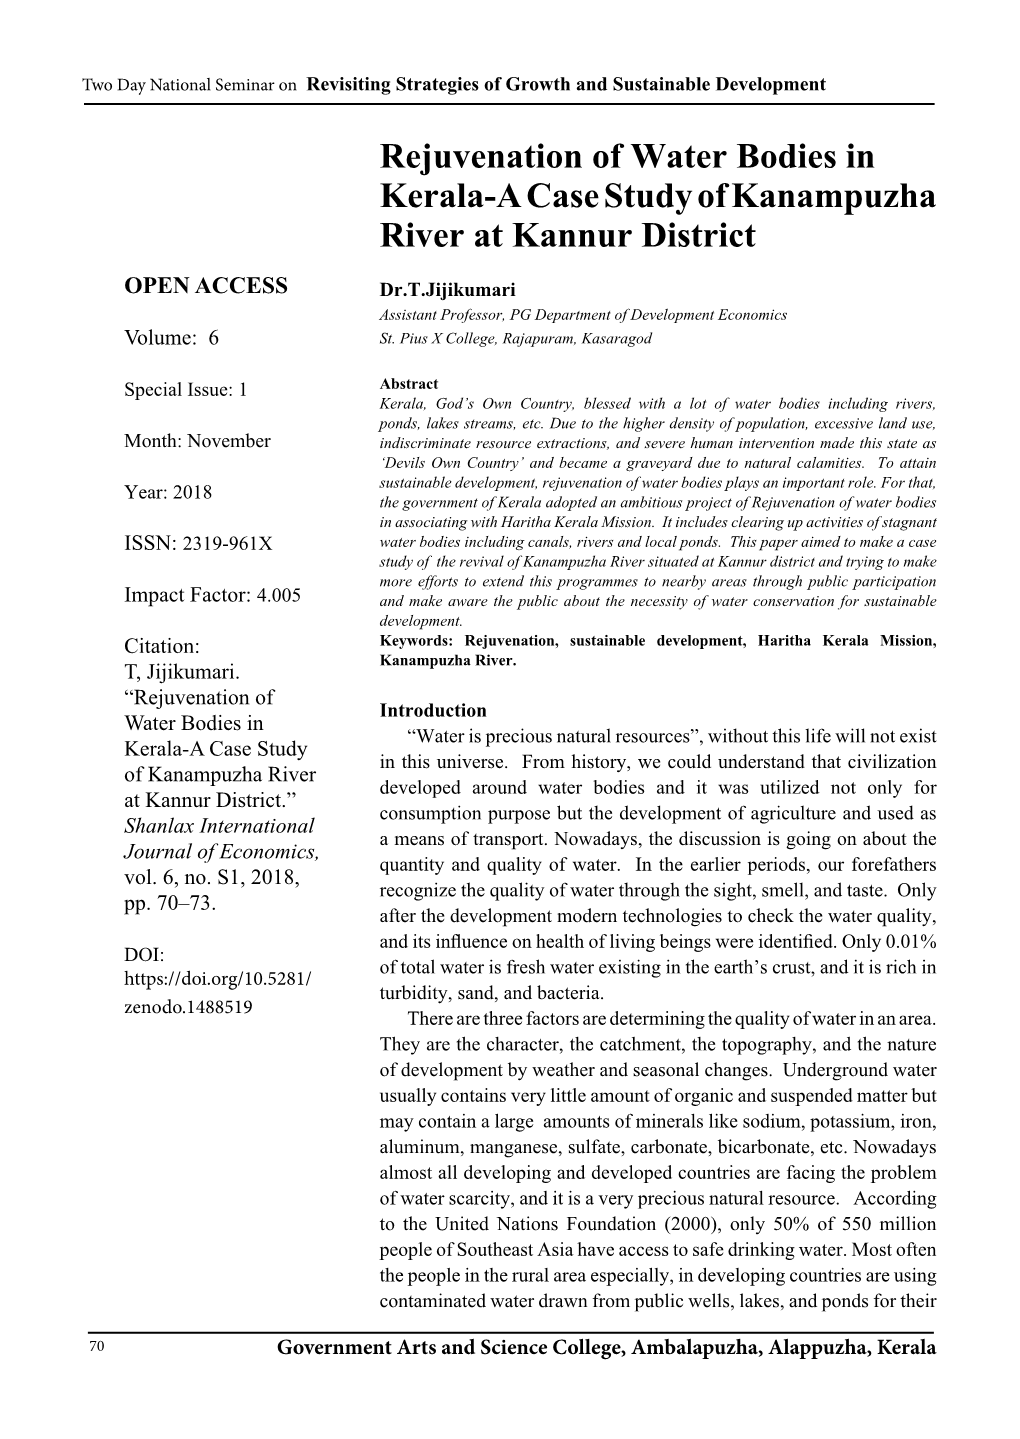 Rejuvenation of Water Bodies in Kerala-A Case Study of Kanampuzha River at Kannur District